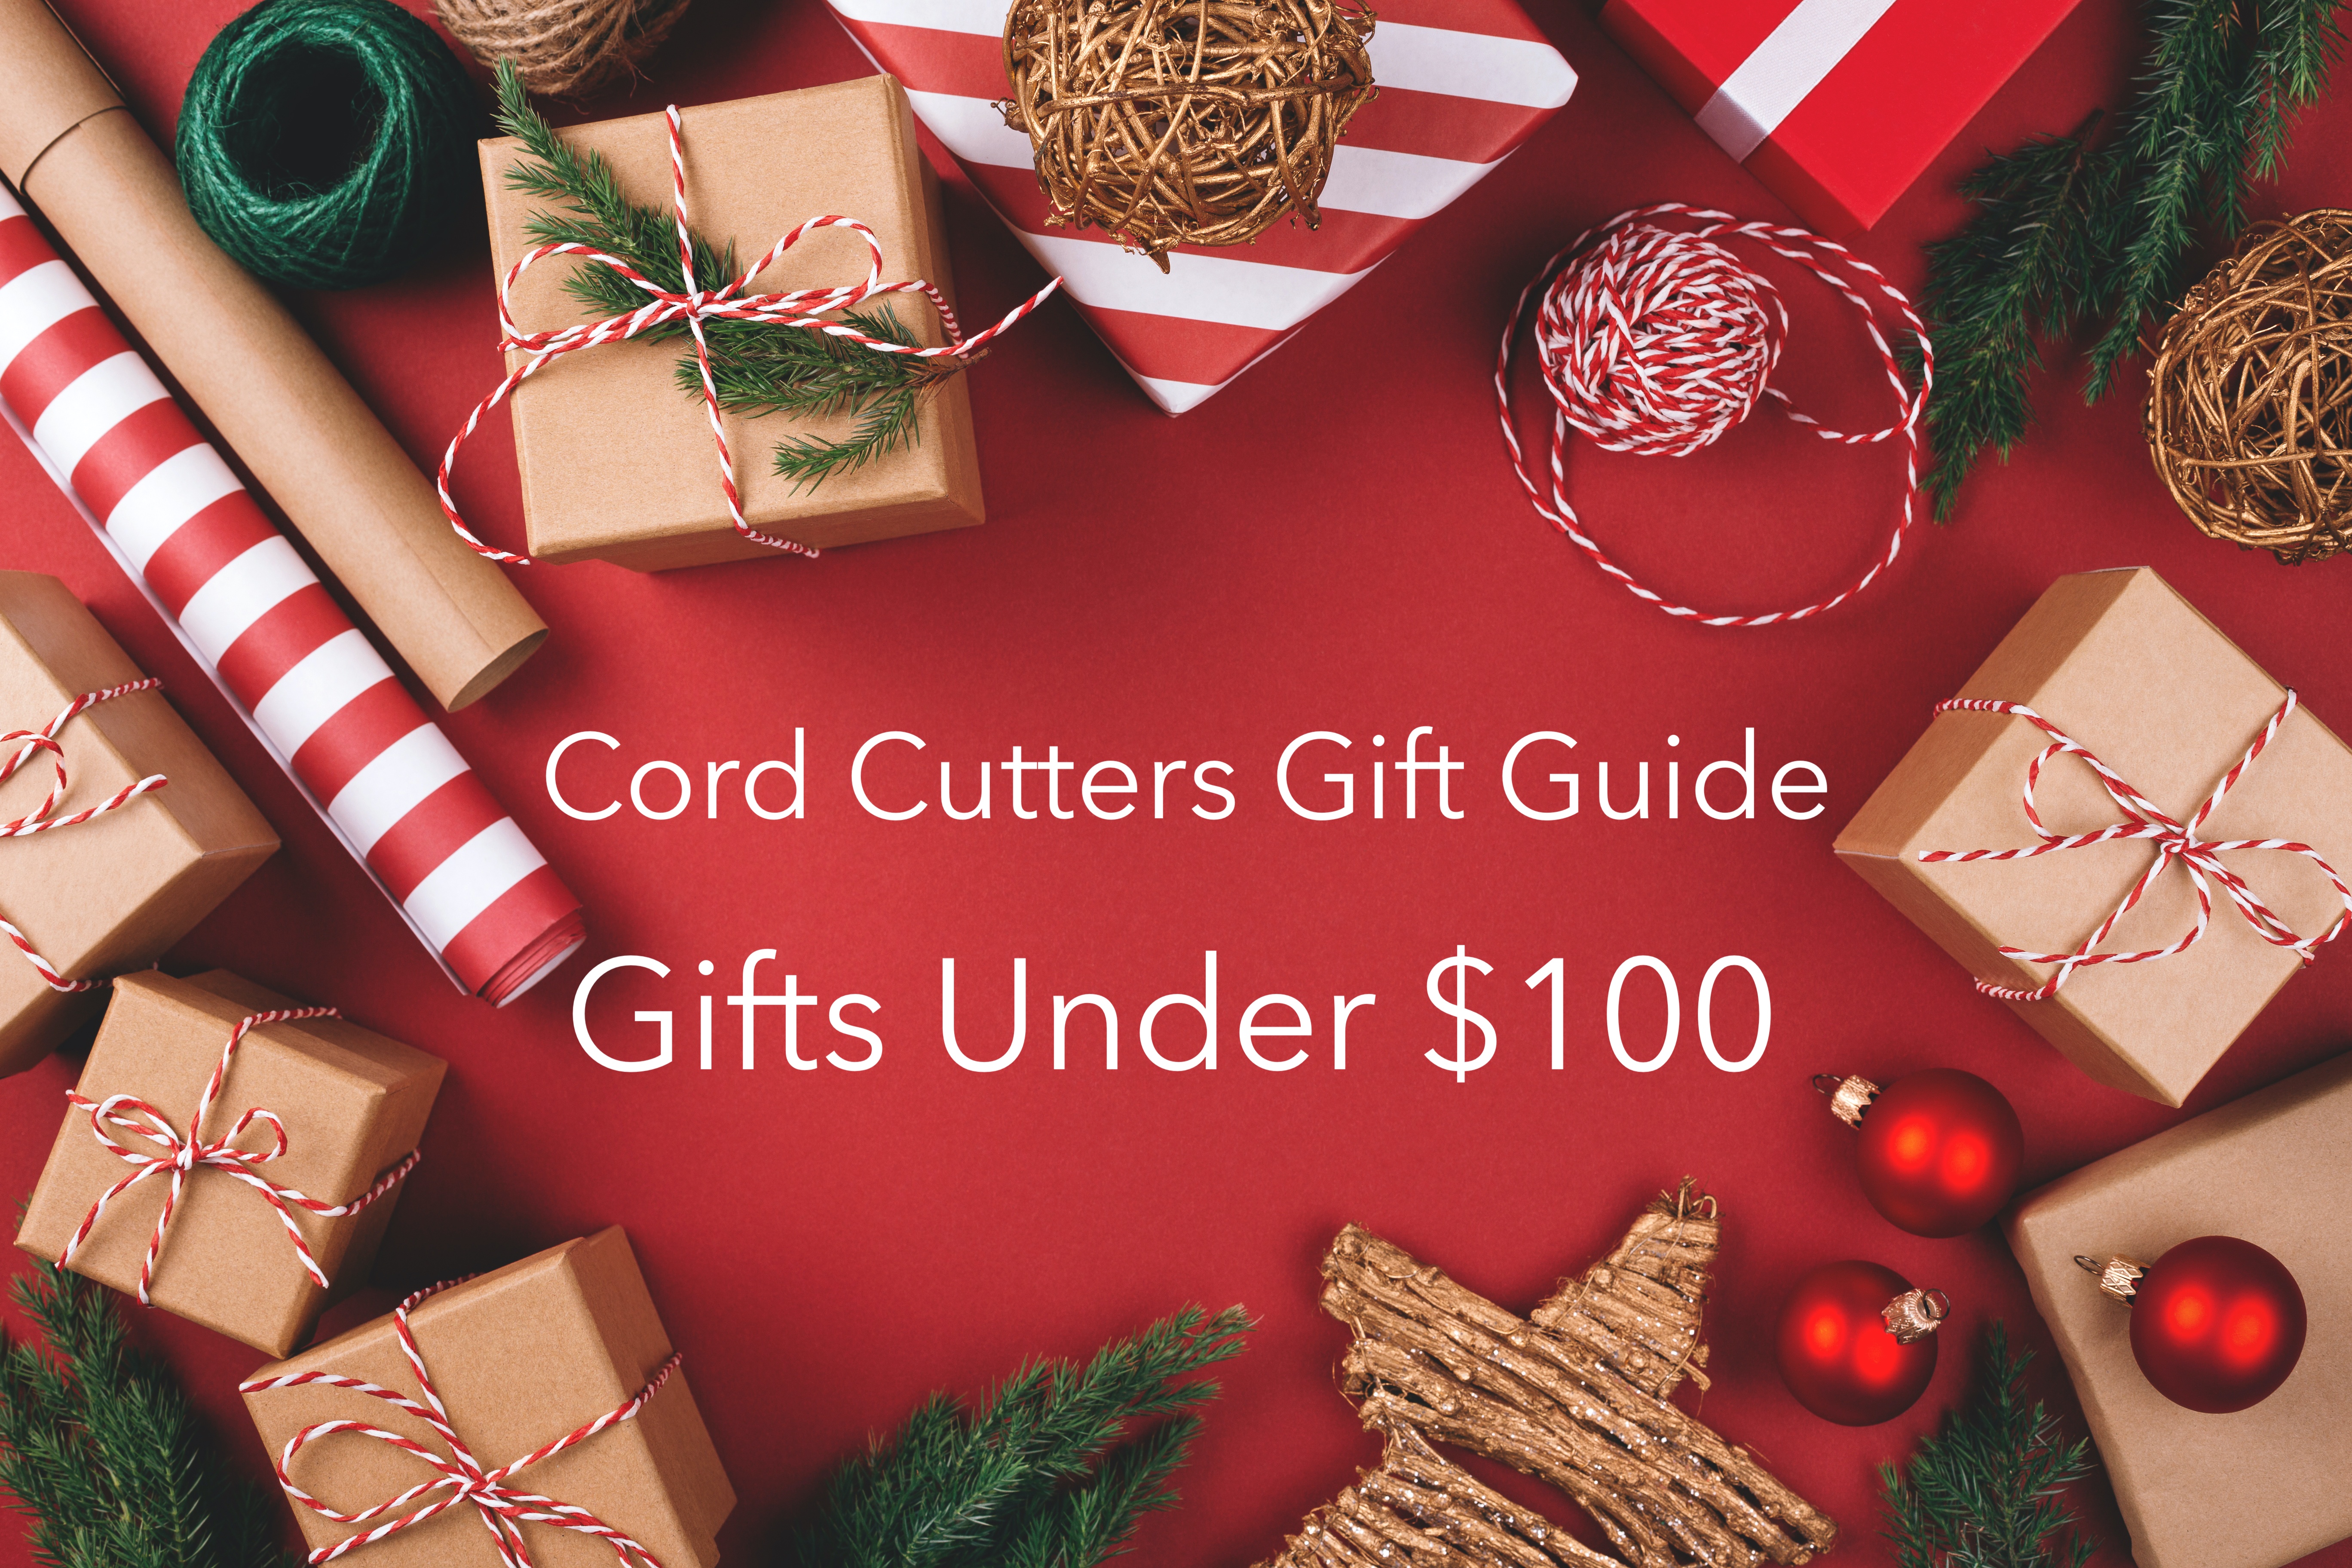 Best Gifts Under $100 for Cord Cutters 2020